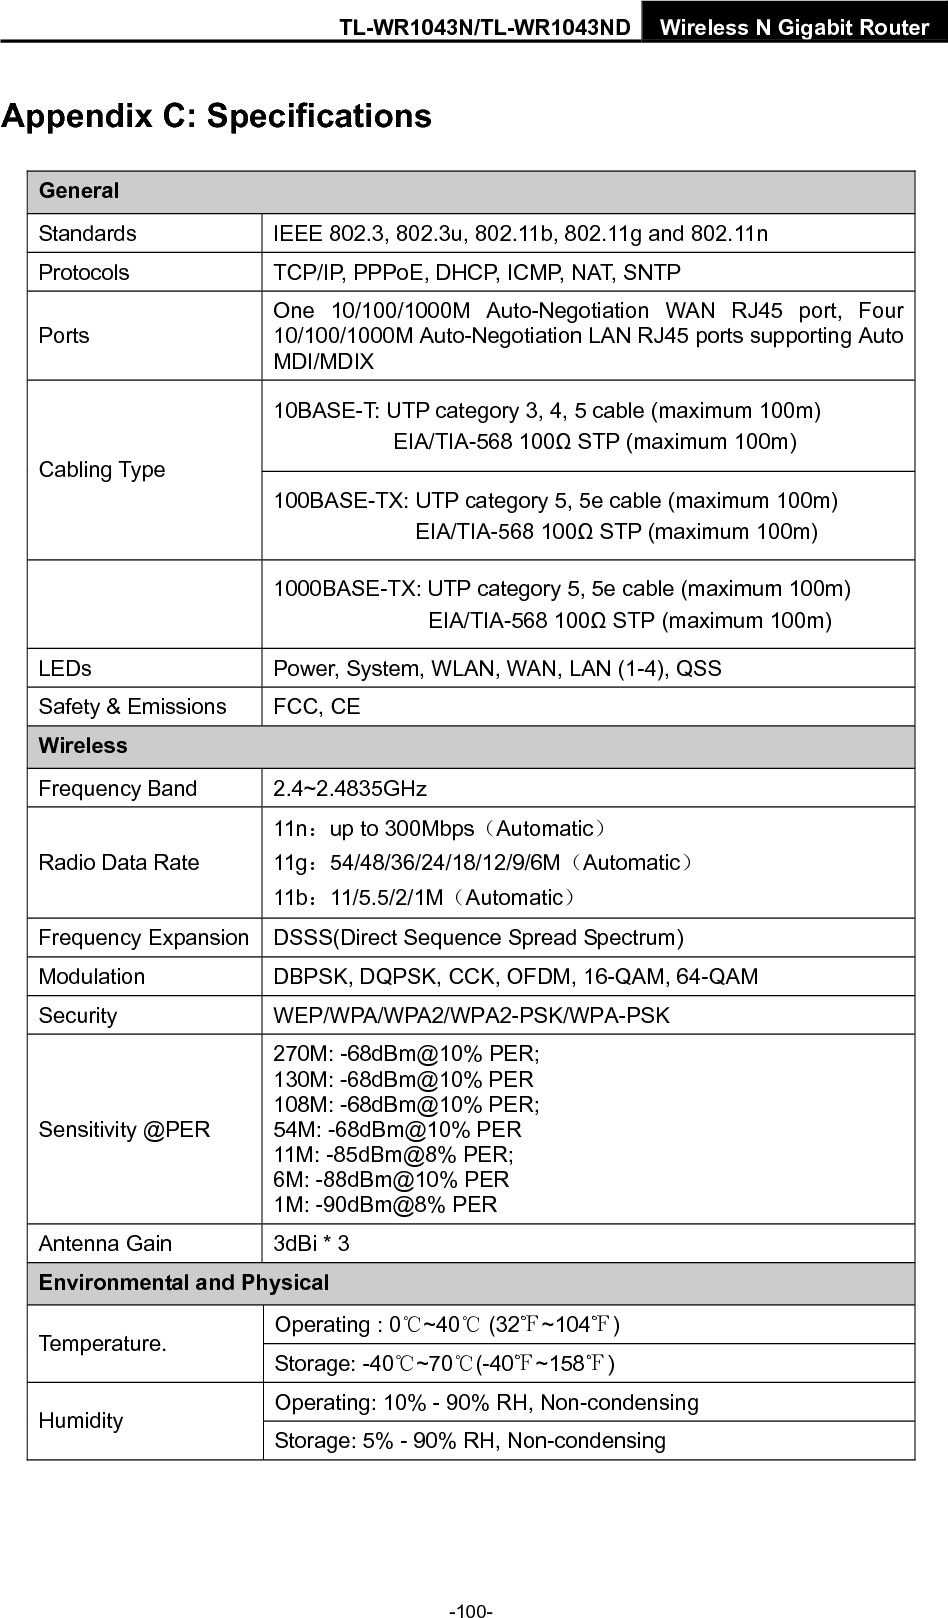 TL-WR1043N/TL-WR1043ND Wireless N Gigabit Router Appendix D: Glossary ¾ 802.11n - 802.11n builds upon previous 802.11 standards by adding MIMO (multiple-input multiple-output). MIMO uses multiple transmitter and receiver antennas to allow for increased data throughput via spatial multiplexing and increased range by exploiting the spatial diversity, perhaps through coding schemes like Alamouti coding. The Enhanced Wireless Consortium (EWC) [3] was formed to help accelerate the IEEE 802.11n development process and promote a technology specification for interoperability of next-generation wireless local area networking (WLAN) products. ¾ 802.11b - The 802.11b standard specifies a wireless networking at 11 Mbps using direct-sequence spread-spectrum (DSSS) technology and operating in the unlicensed radio spectrum at 2.4GHz, and WEP encryption for security. 802.11b networks are also referred to as Wi-Fi networks. ¾ 802.11g - specification for wireless networking at 54 Mbps using direct-sequence spread-spectrum (DSSS) technology, using OFDM modulation and operating in the unlicensed radio spectrum at 2.4GHz, and backward compatibility with IEEE 802.11b devices, and WEP encryption for security. ¾ DDNS  (Dynamic  Domain  Name  System) - The capability of assigning a fixed host and domain name to a dynamic Internet IP Address.   ¾ DHCP  (Dynamic Host  Configuration Protocol)  - A protocol that automatically configure the TCP/IP parameters for the all the PC(s) that are connected to a DHCP server. ¾ DMZ (Demilitarized Zone) - A Demilitarized Zone allows one local host to be exposed to the Internet for a special-purpose service such as Internet gaming or videoconferencing. ¾ DNS (Domain Name System) - An Internet Service that translates the names of websites into IP addresses. ¾ Domain Name - A descriptive name for an address or group of addresses on the Internet.   ¾ DSL  (Digital Subscriber Line)  - A technology that allows data to be sent or received over existing traditional phone lines. ¾ ISP (Internet Service Provider) - A company that provides access to the Internet. ¾ MTU (Maximum Transmission Unit) - The size in bytes of the largest packet that can be transmitted. ¾ NAT (Network Address Translation) - NAT technology translates IP addresses of a local area network to a different IP address for the Internet. ¾ PPPoE (Point to Point Protocol over Ethernet) - PPPoE is a protocol for connecting remote hosts to the Internet over an always-on connection by simulating a dial-up connection. ¾ SSID - A  Service  Set  Identification is a thirty-two character (maximum) alphanumeric key -101- 